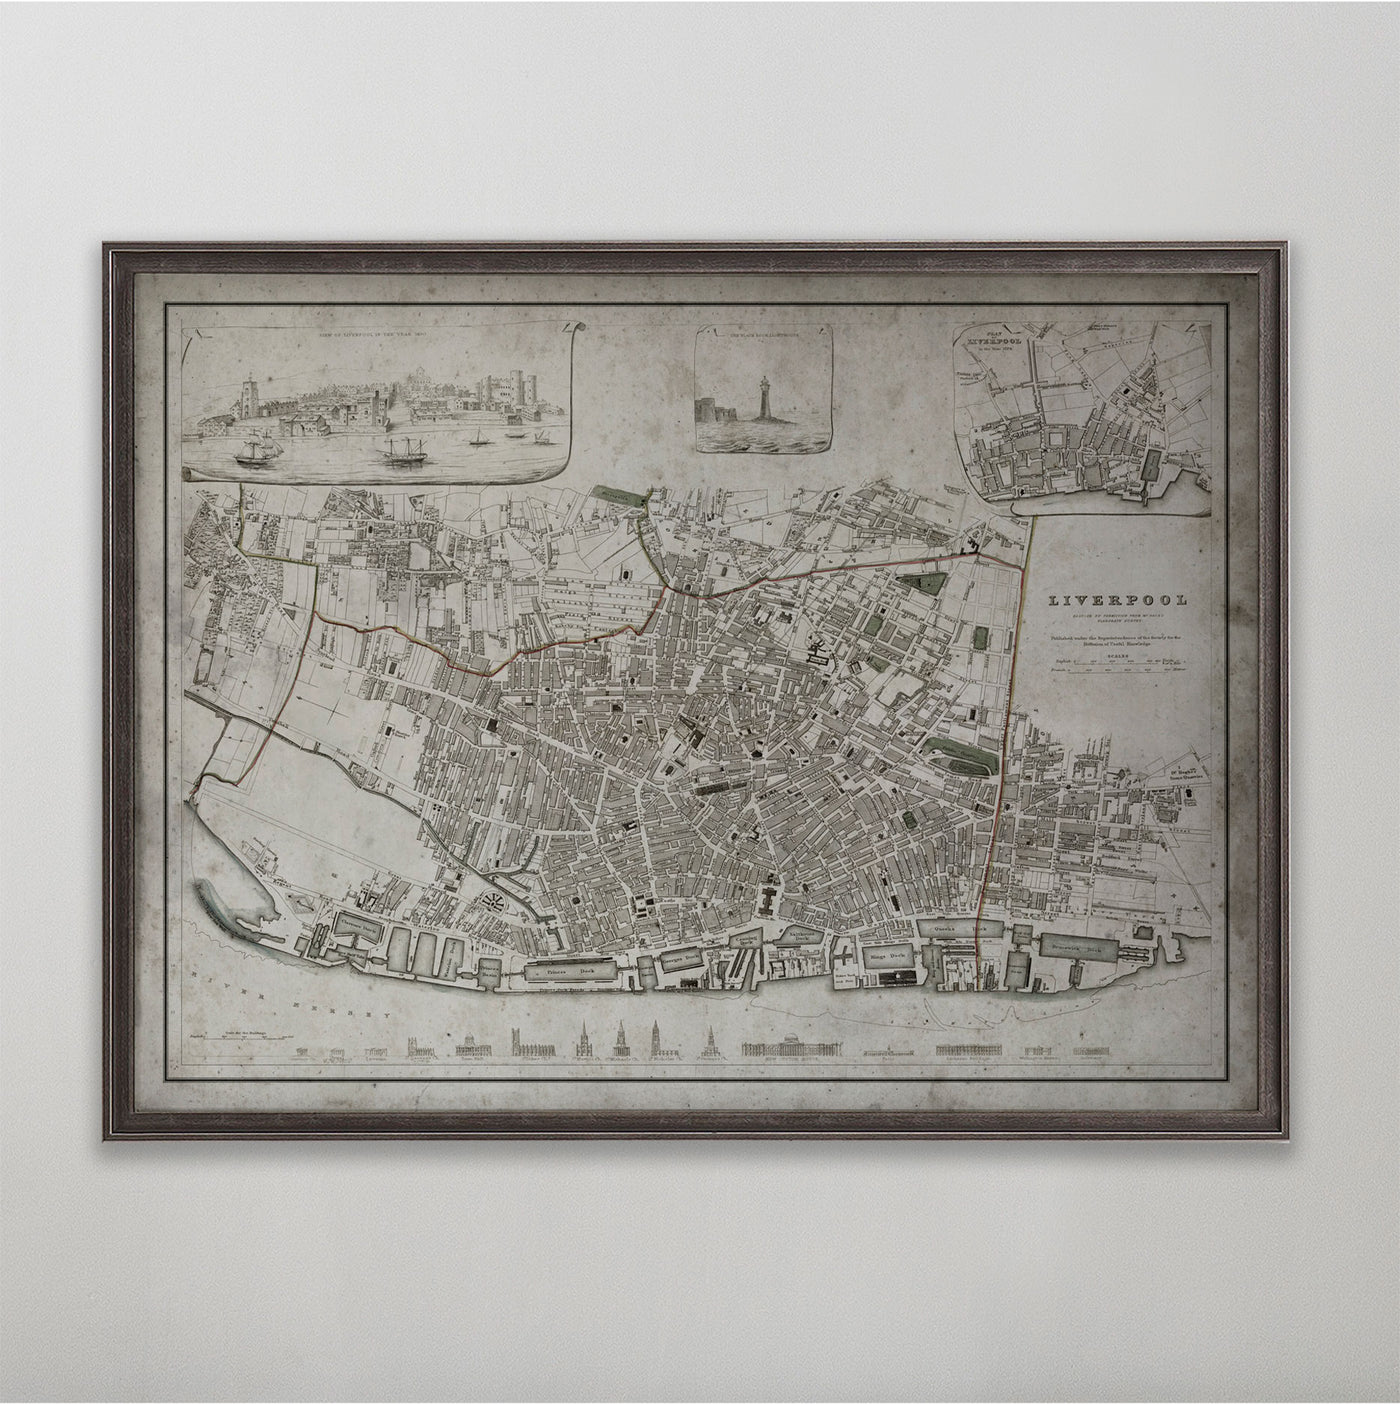 Old vintage historic map of Liverpool, England for wall art home decor. 